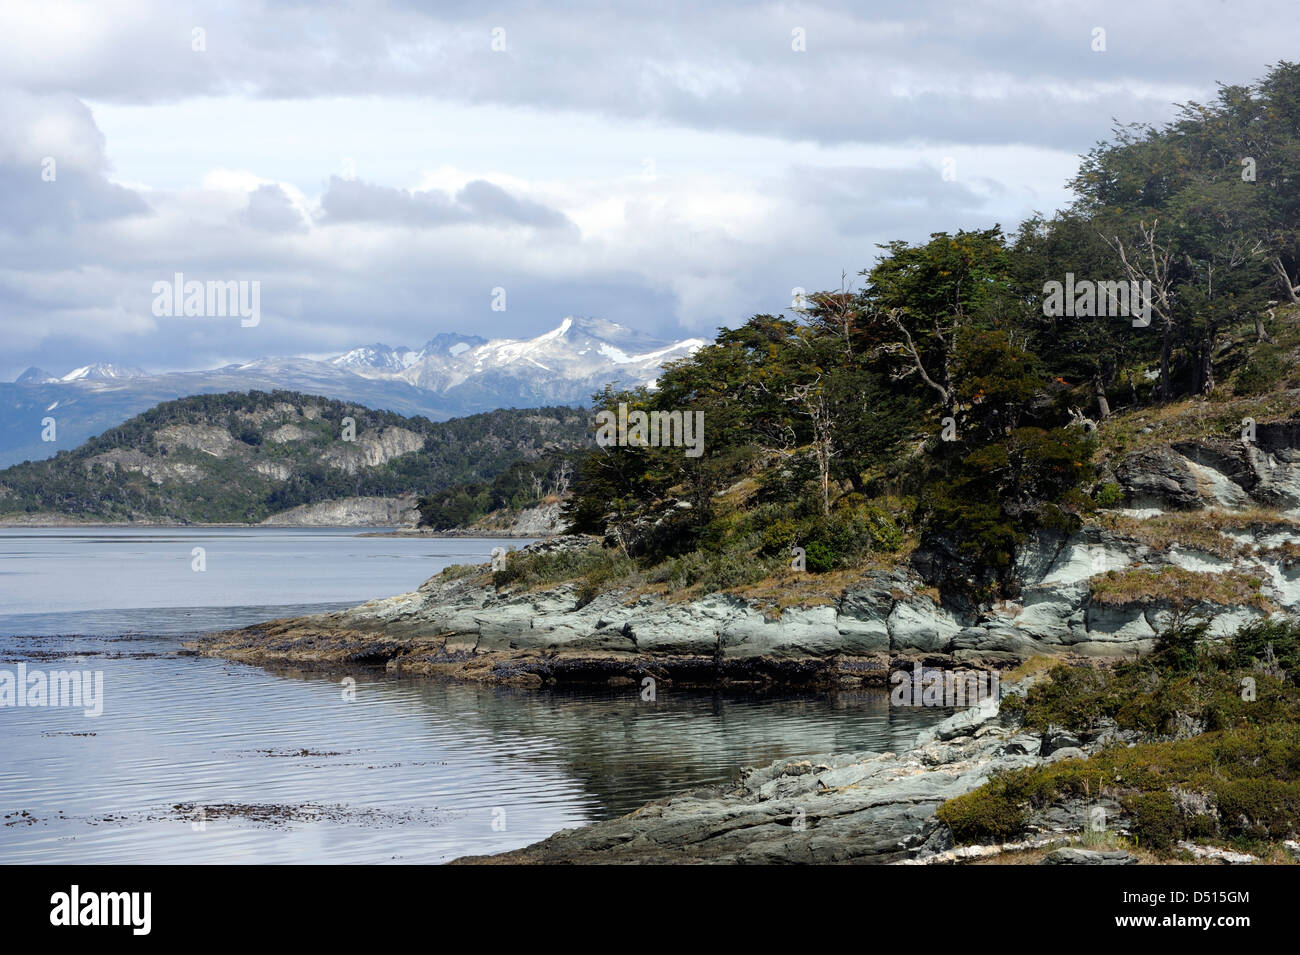 Ancient Guindo, Evergreen Southern Beech (Nothofagus betuloides) grow down to the beach of Zaratiegul Bay off the Beagle Channel Stock Photo